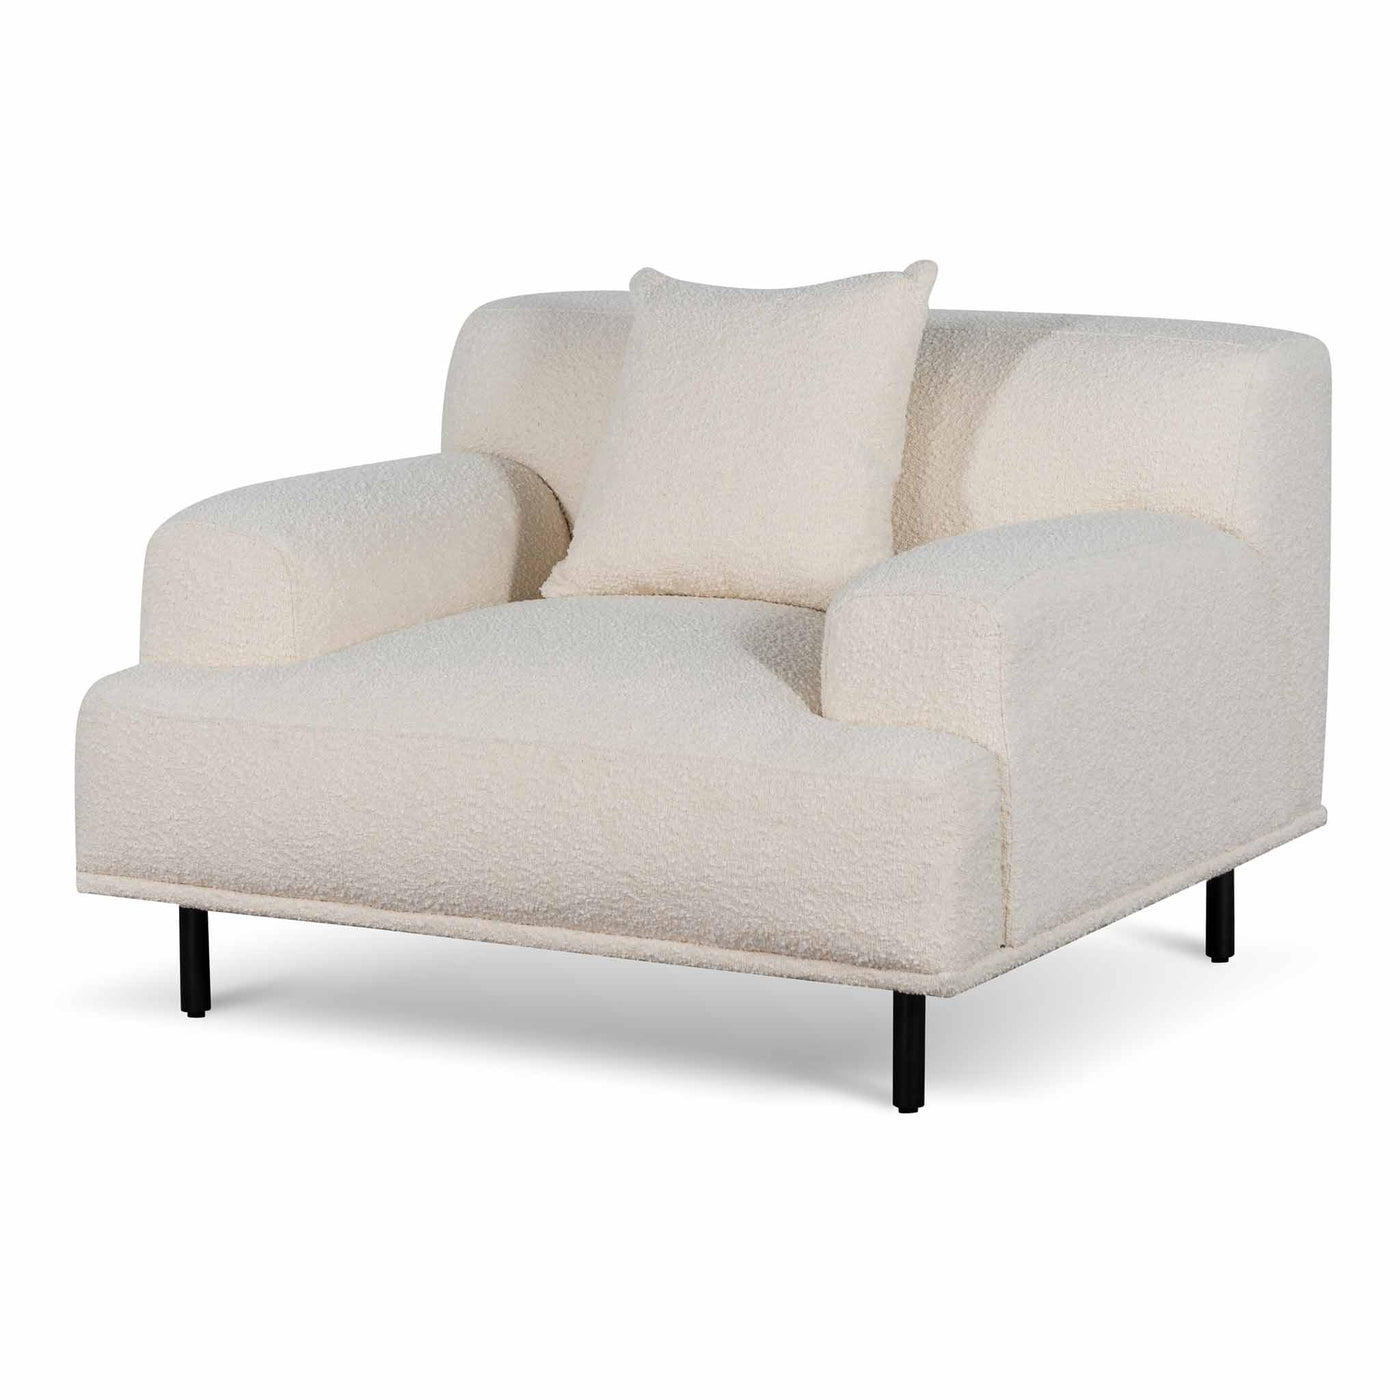 Armchair - Ivory White Boucle with Black Legs